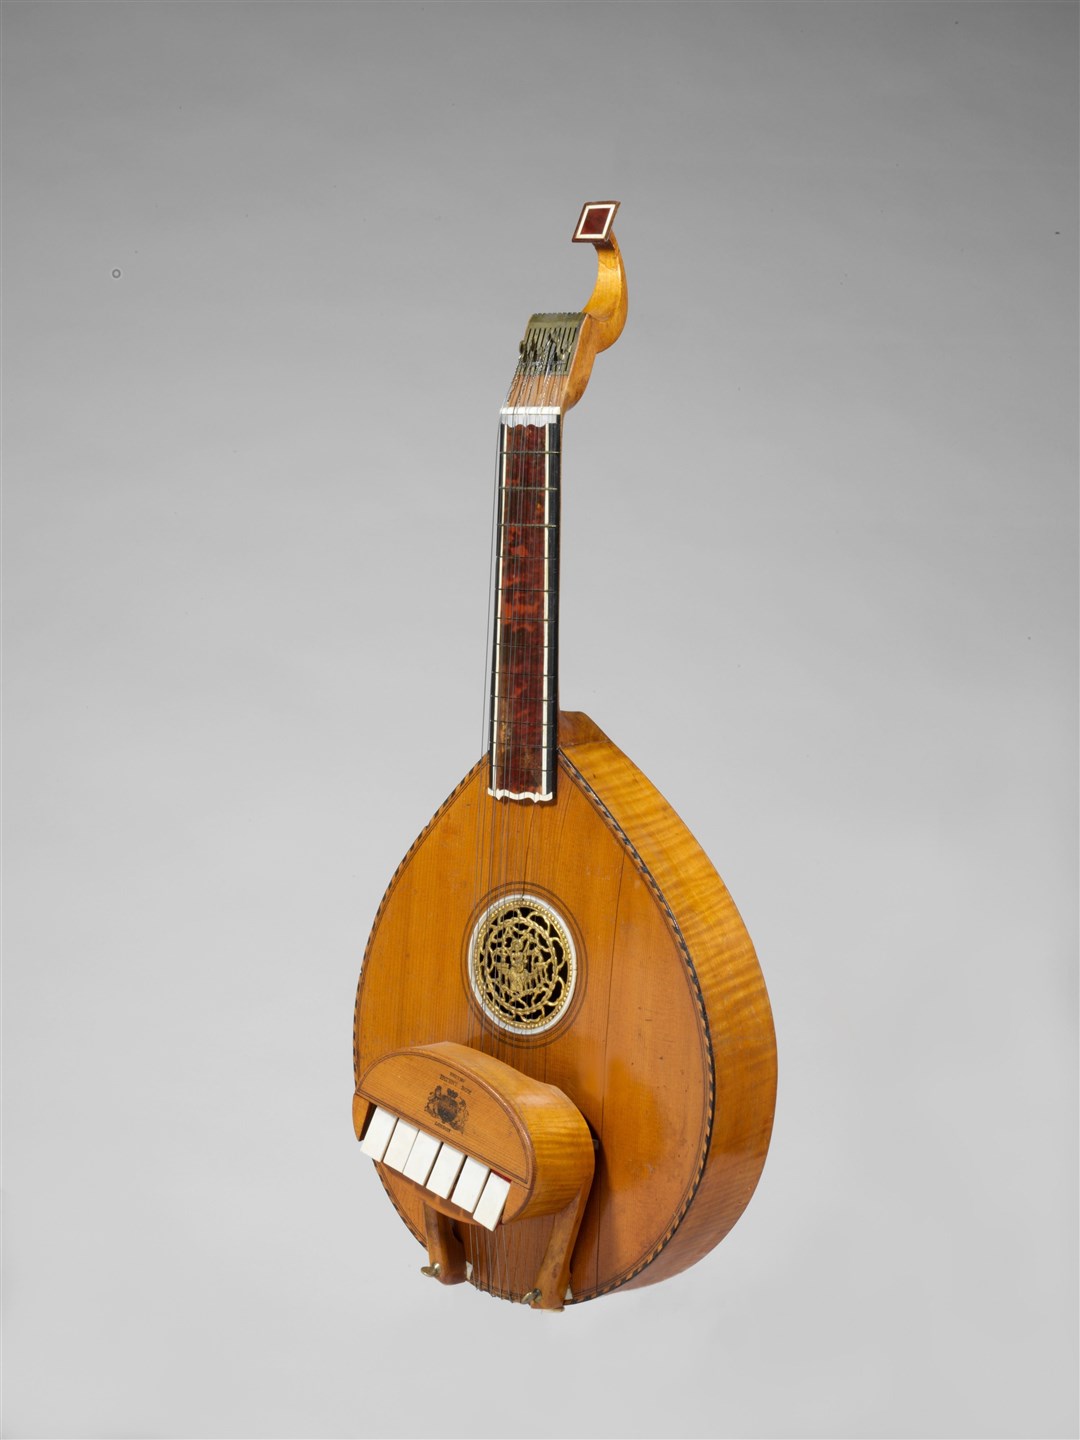 In case you're wondering, this is what a cittern looks like.